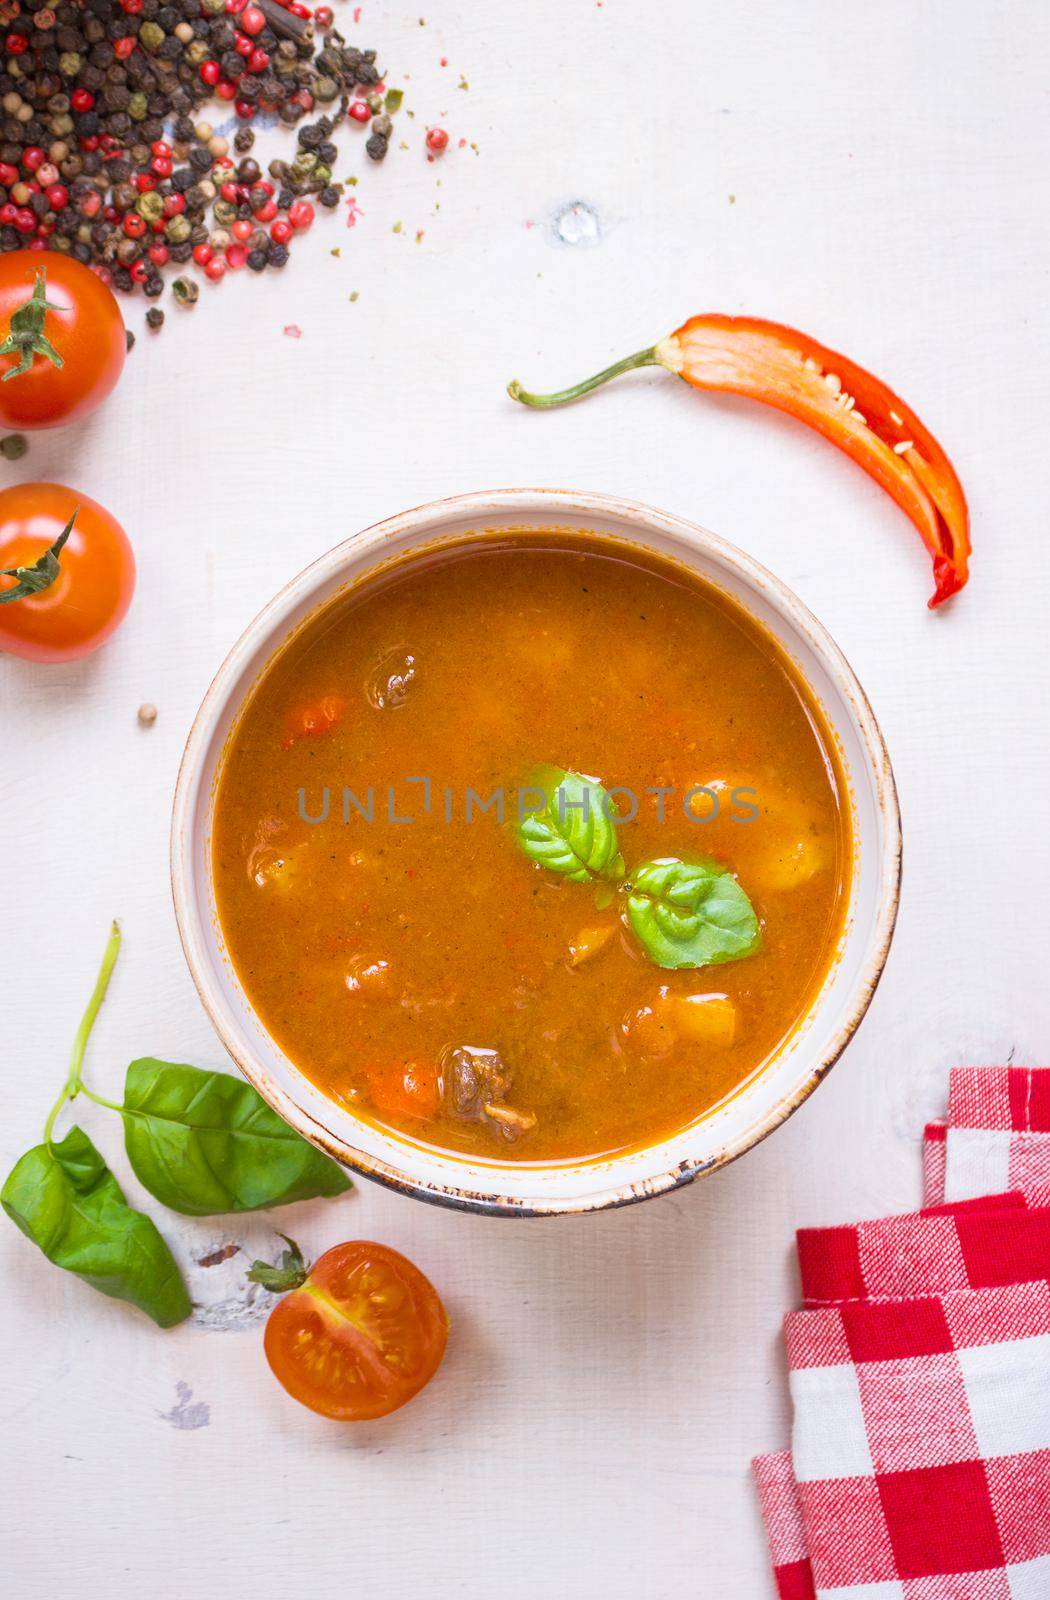 Delicious tomato soup with meat in a white bowl on a wooden table with fresh cherry tomatoes, basil leaves, cut chili pepper and red gingham kitchen towel. Ingredients for soup. Top view